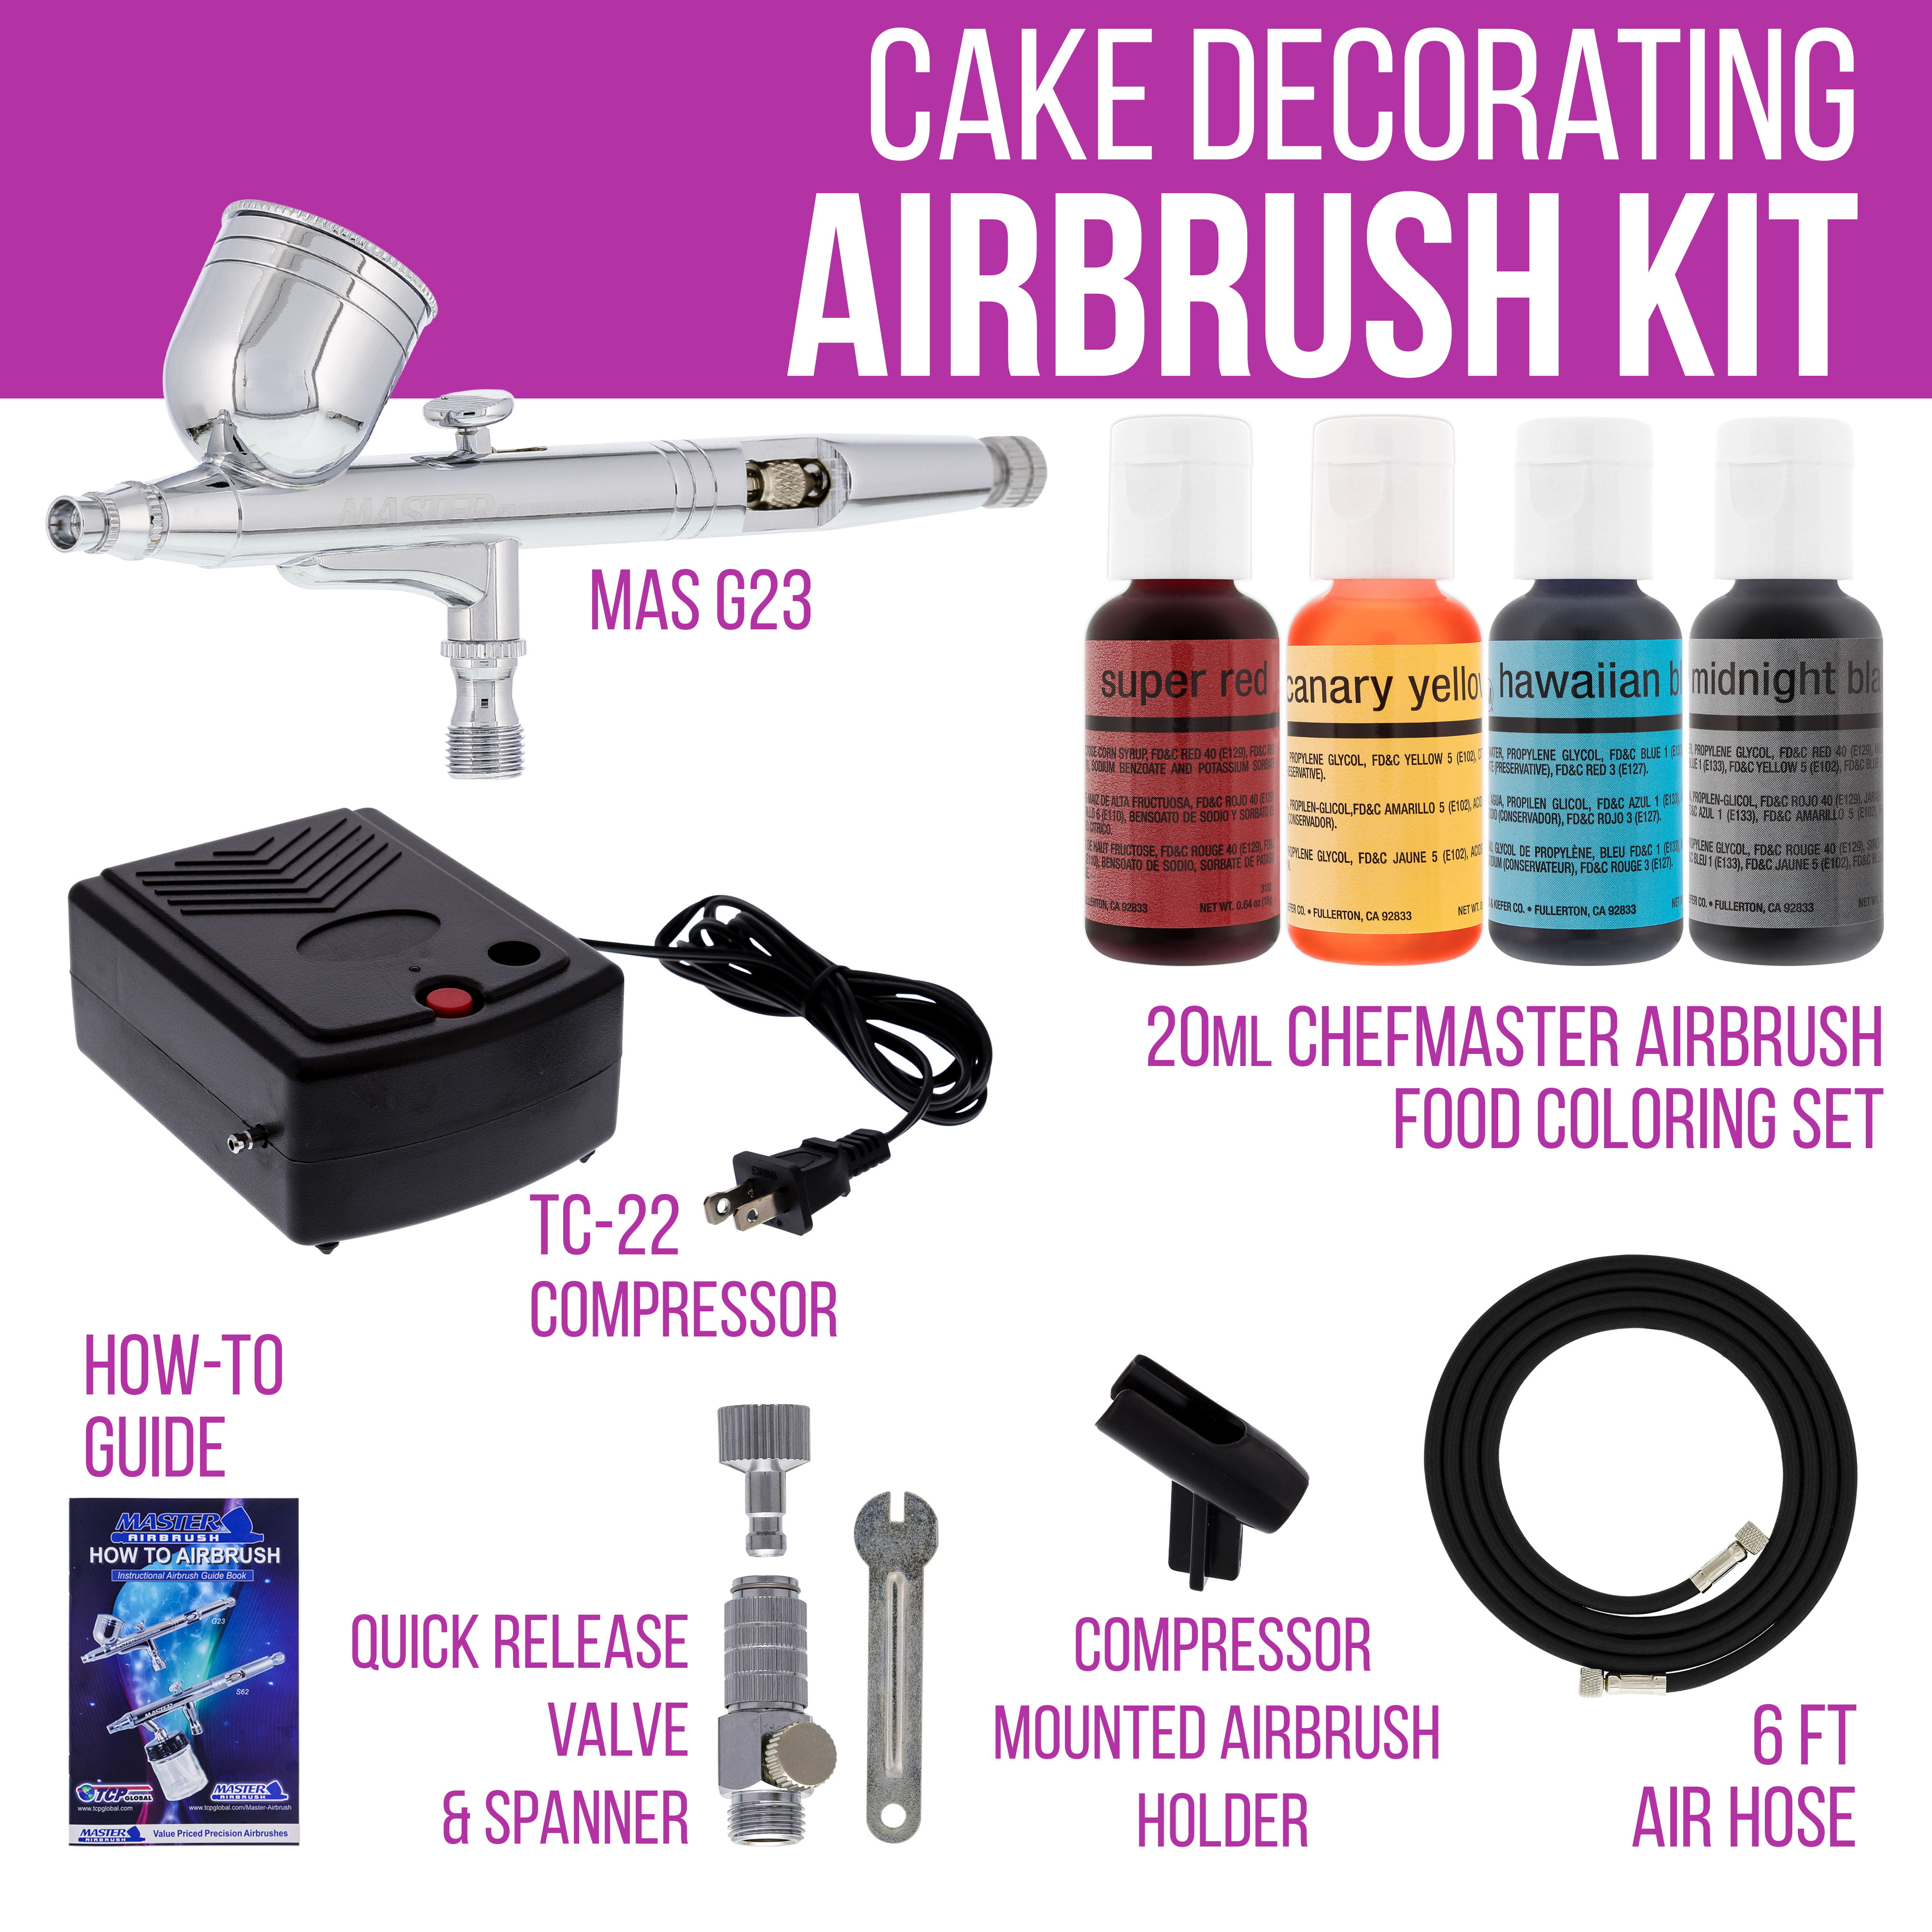 Urijk Cake Decorating Supplies Set，Complete Cake Decorating Airbrush Kit with a Full Selection，Pastry Bag and Cake Turntable Stand for Cupcakes，Cake Mold Kitchen Baking Mold Cake Moulds Modeling Tools 